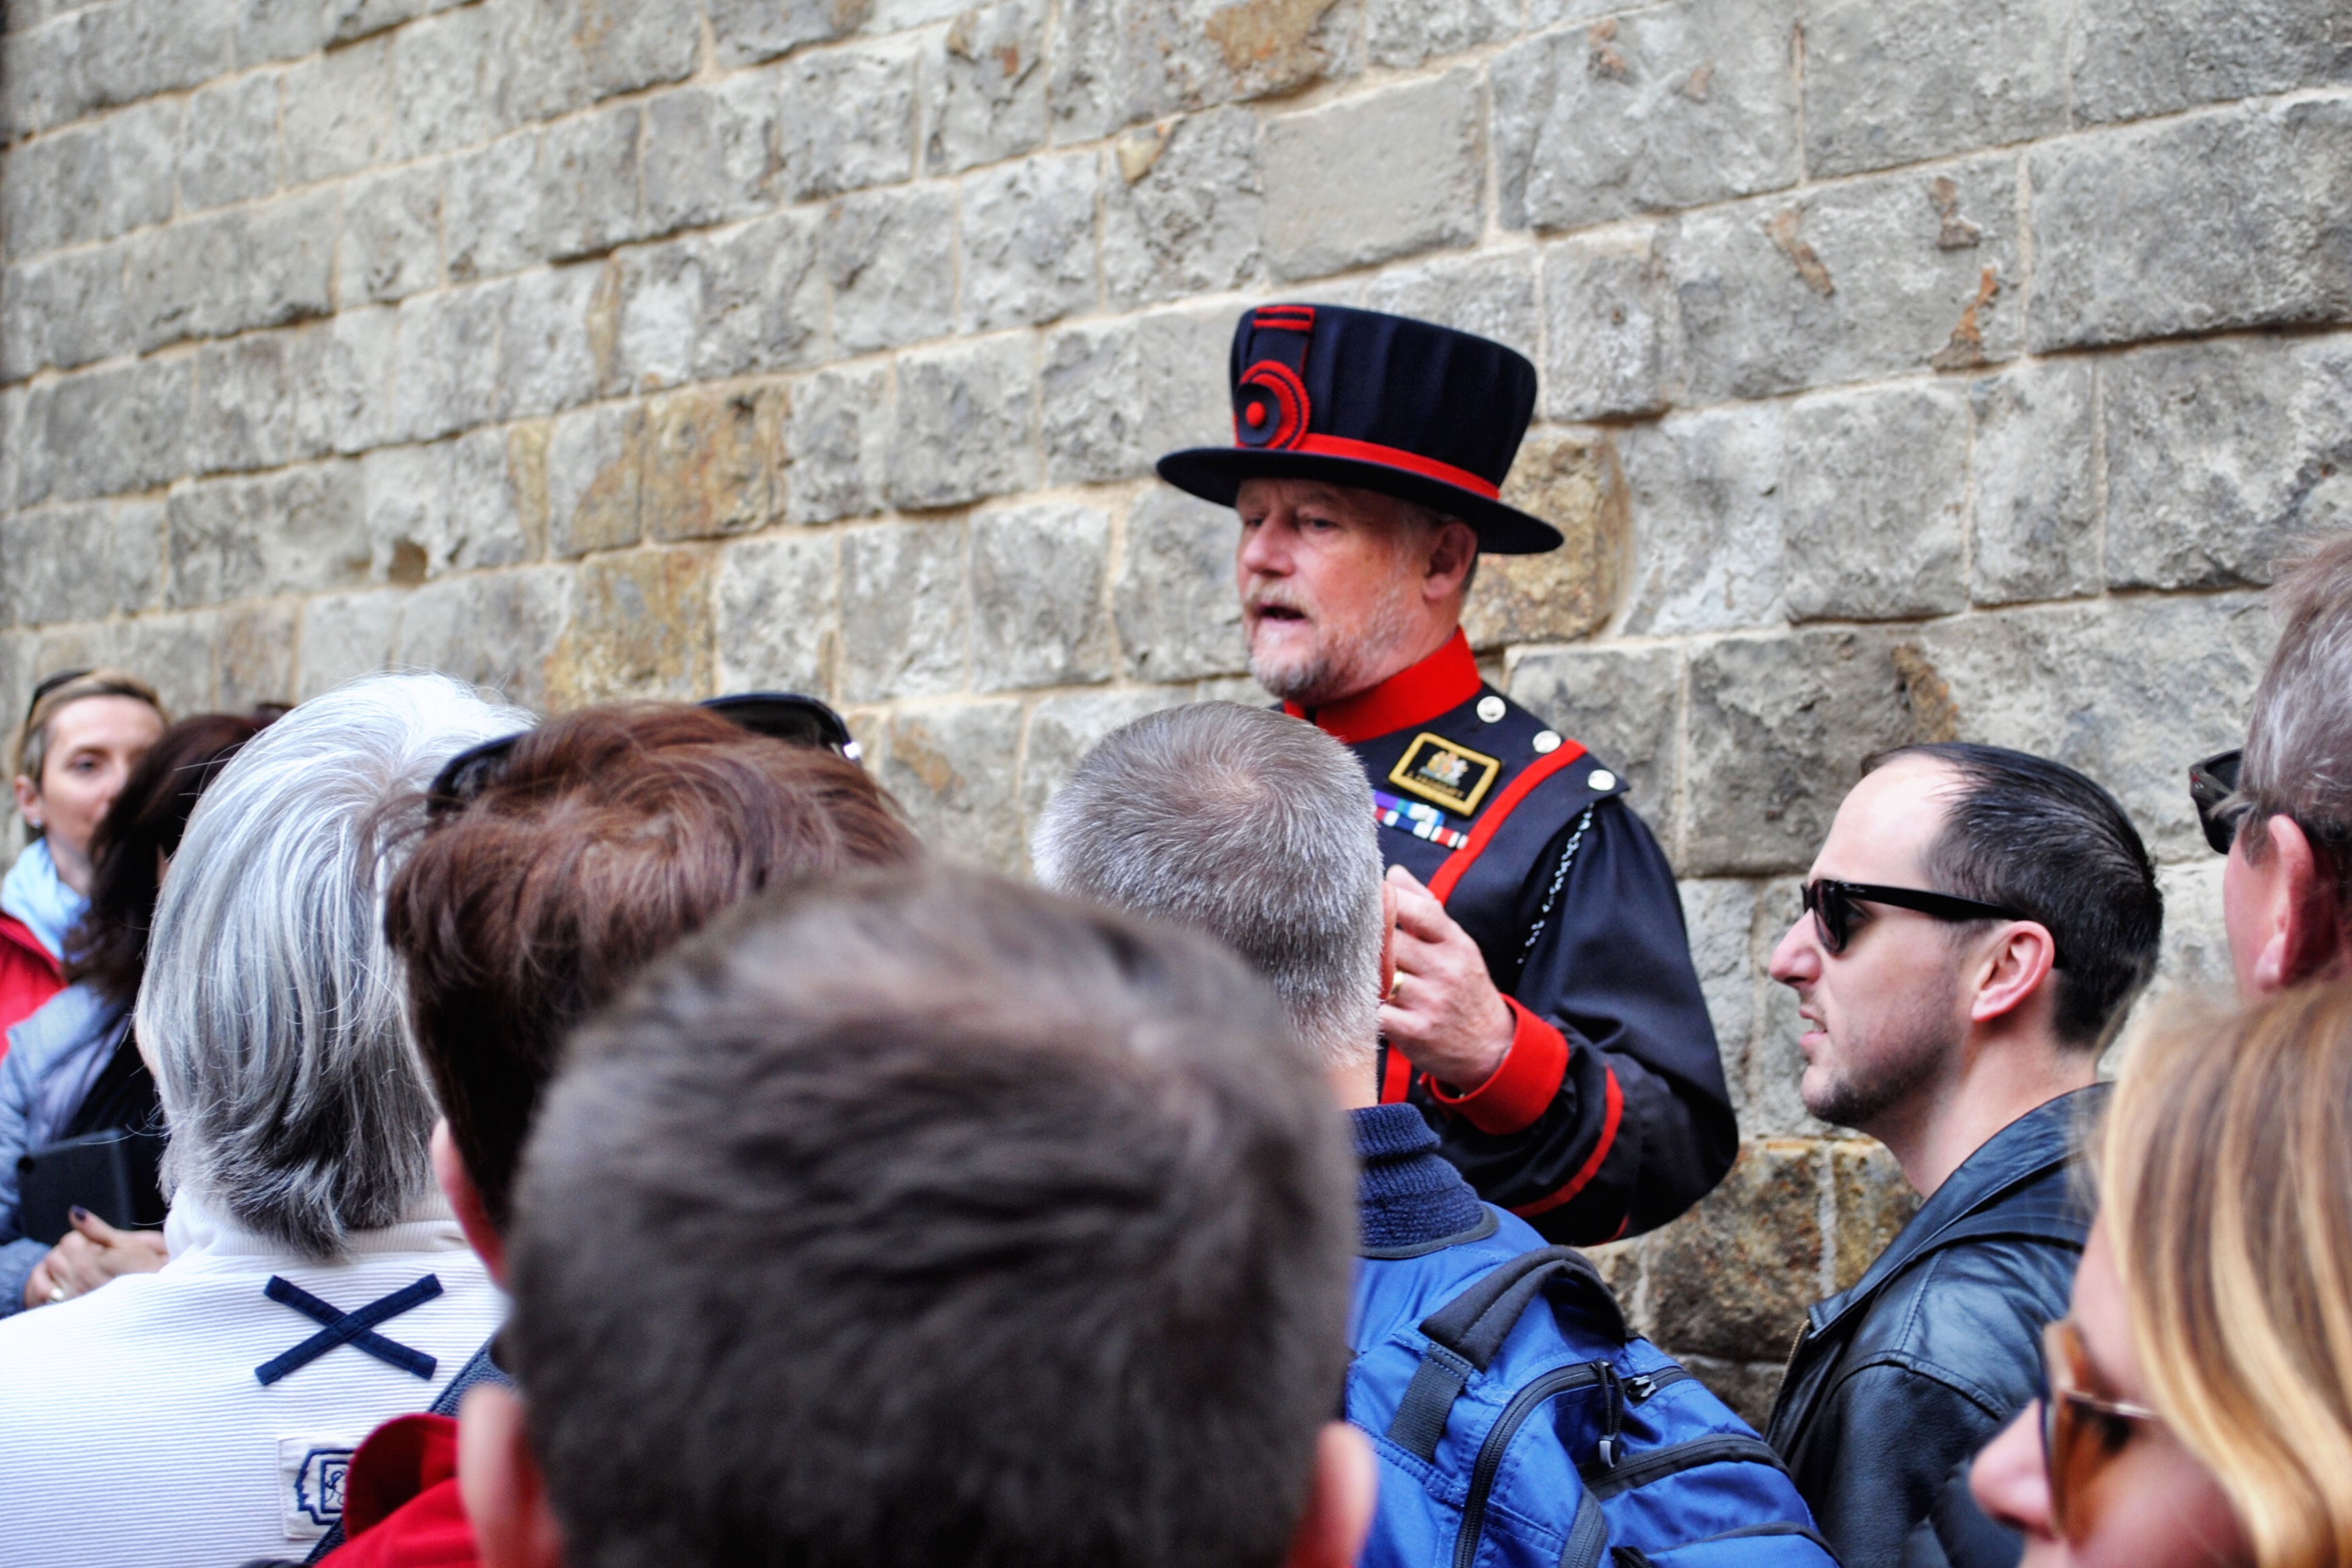 Yeoman Warder tour at the Tower of London